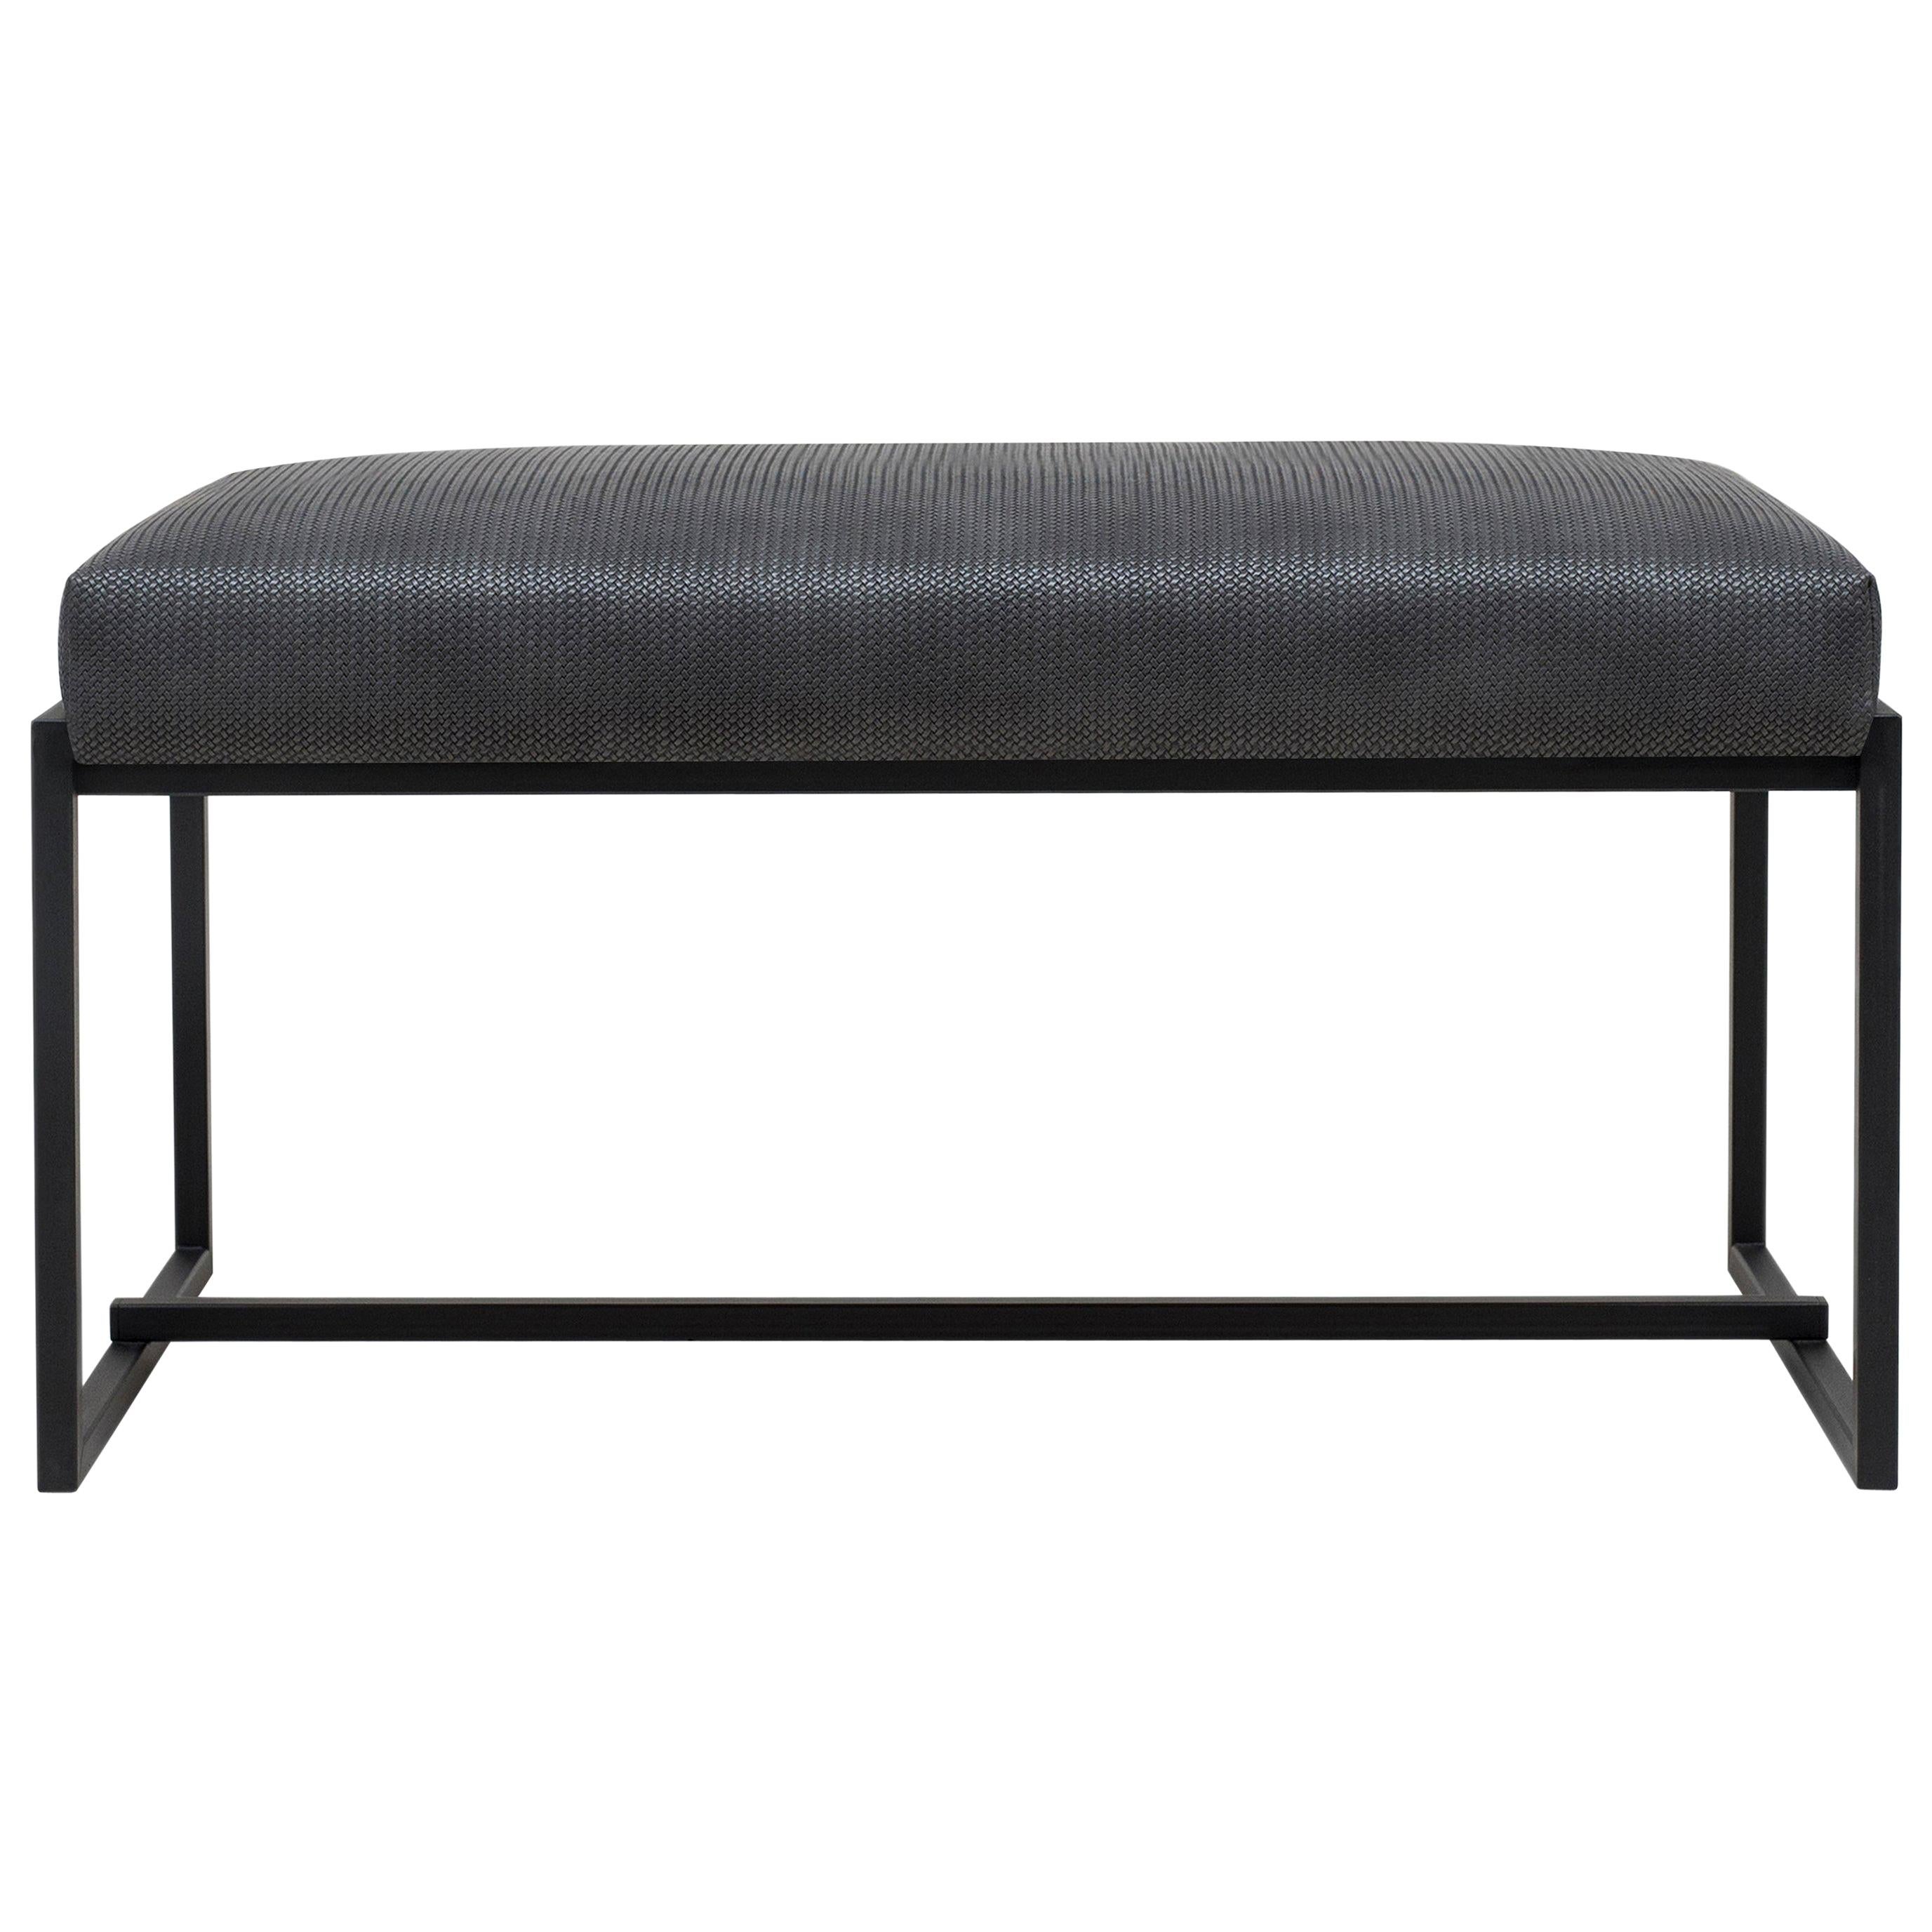 Peter Ghyczy Bench Urban Grace 'GB03' Charcoal / Texturized Dark Fabric